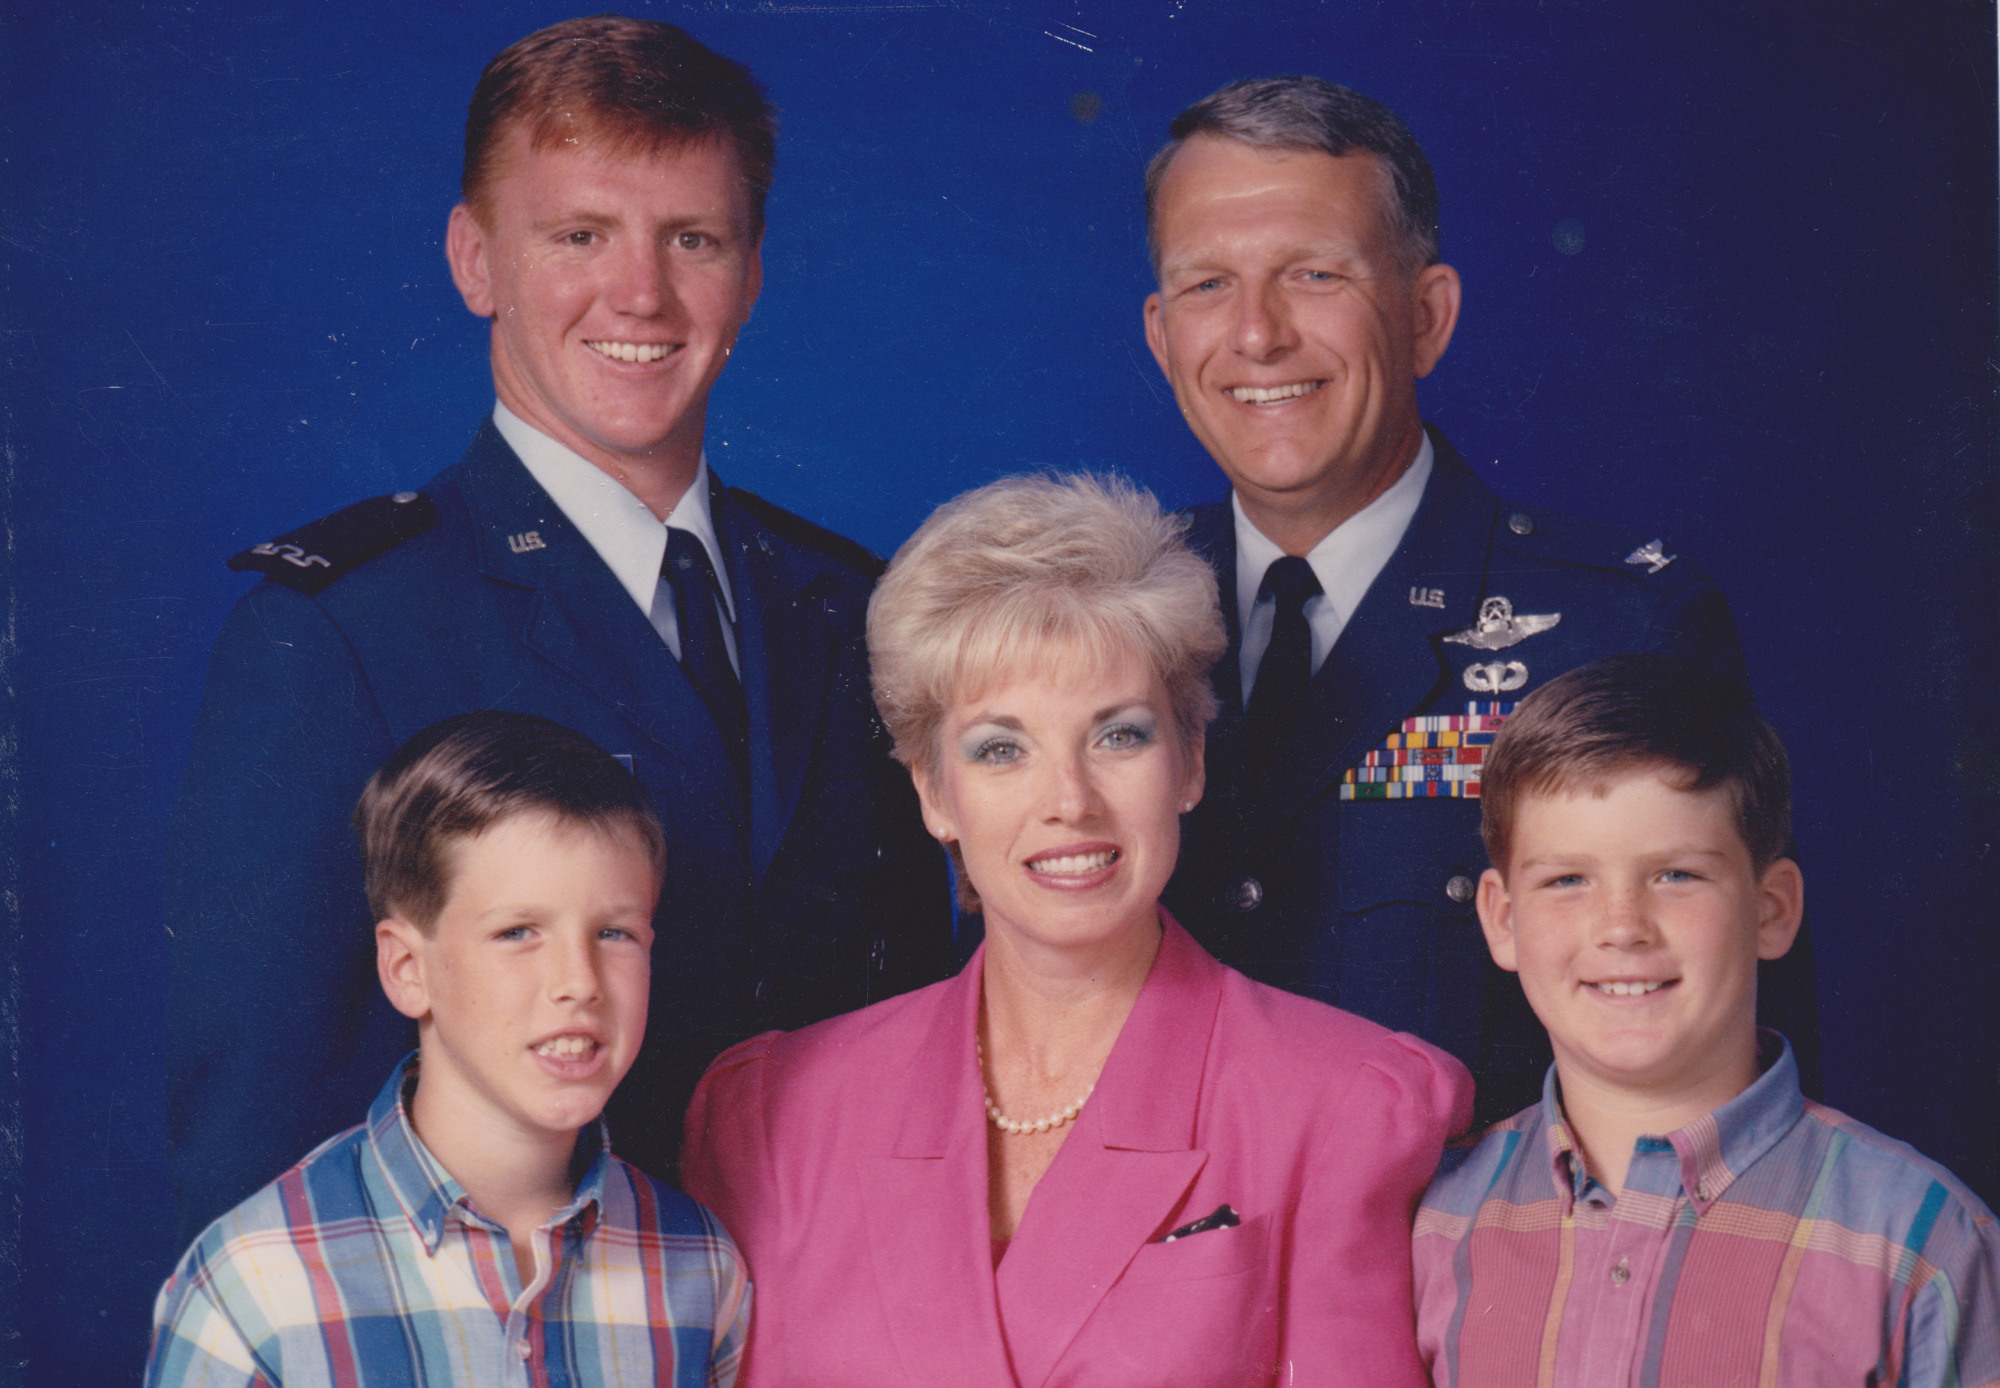 This family photo shows David McKenney, back left, and his father, Wayne McKenney, both of whom attended the U.S. Air Force Academy. Also in the photo are Kristen’s uncles, Matt McKenney and the late Chris McKenney, and her late step-grandmother, Beverly